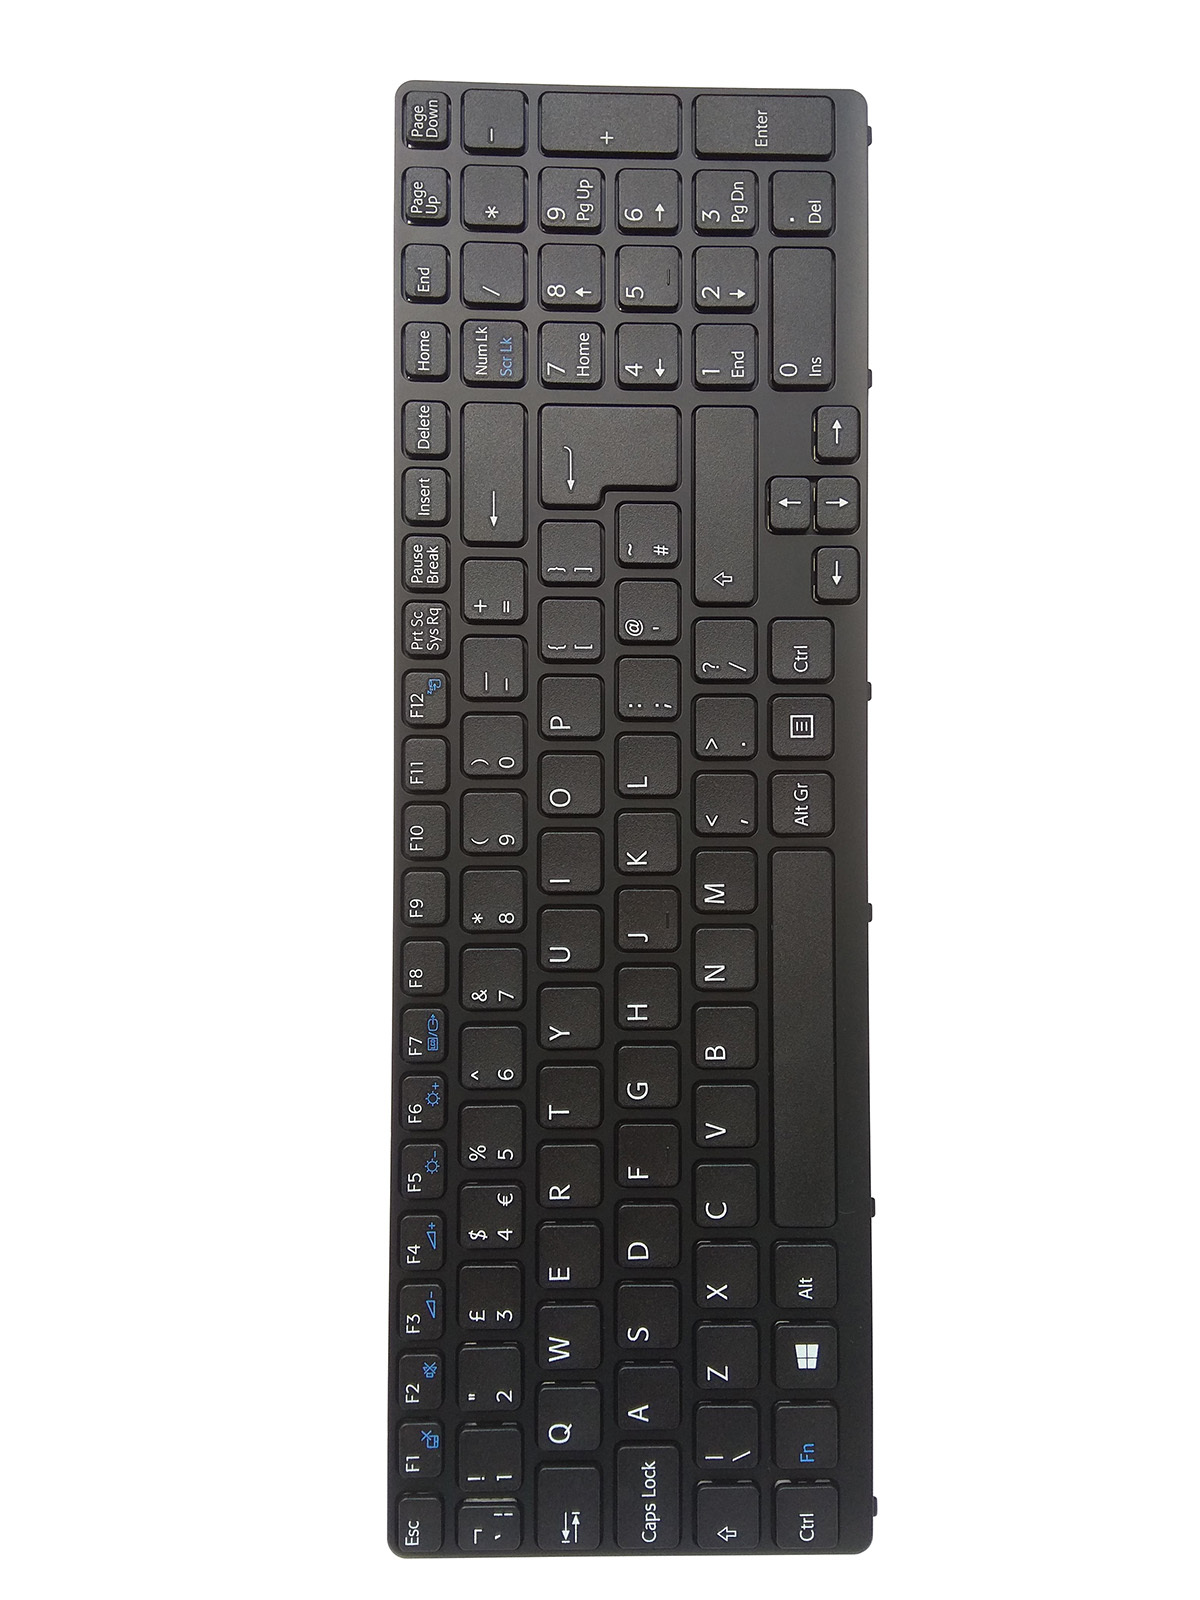 Primary image for Sony VAIO SVE15113FDP Keyboard 149151211 Sony VAIO SVE15121CAB Keyboard